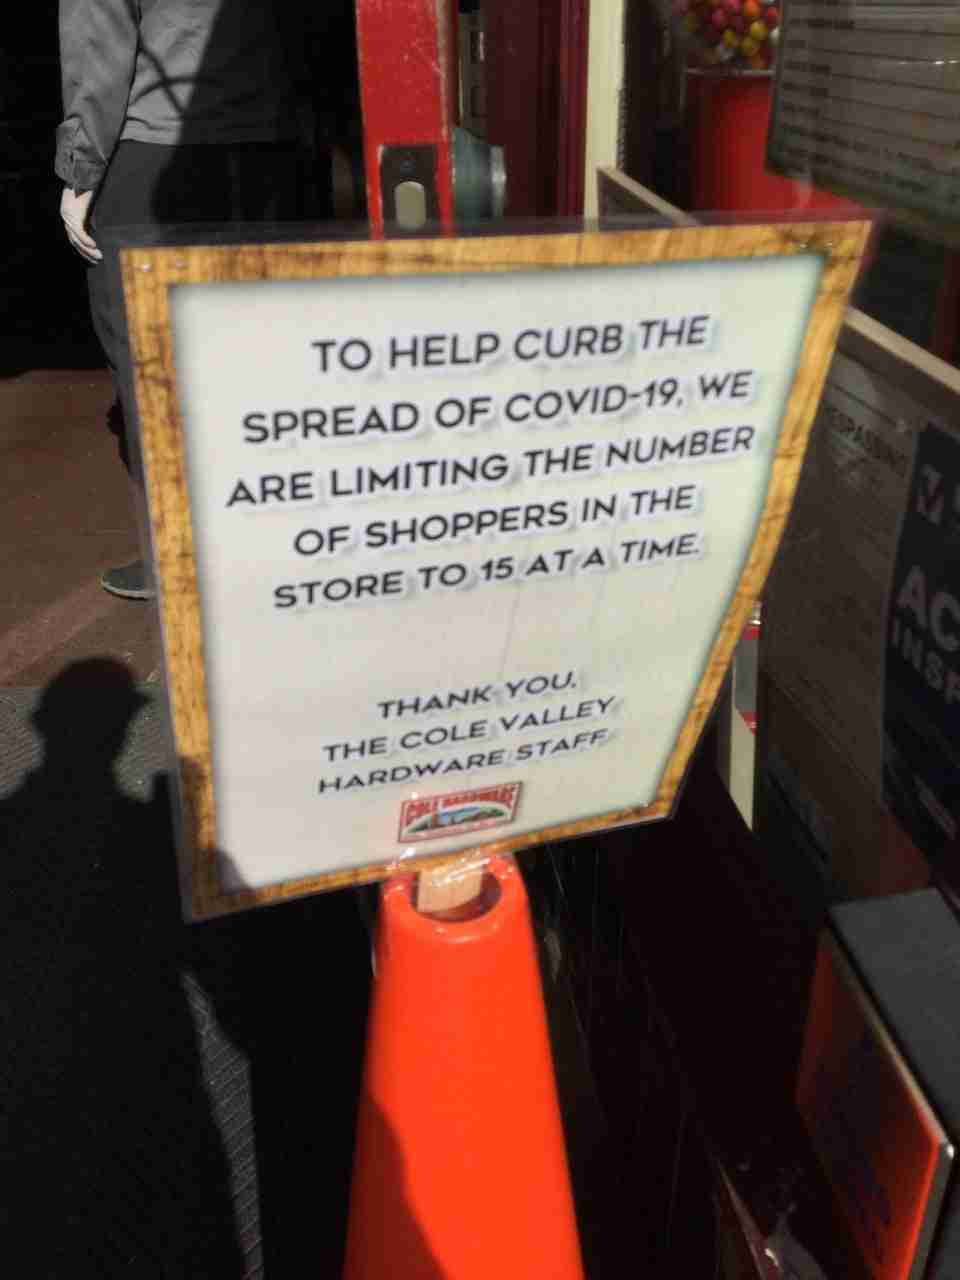 Sign in front of a store entrance with text TO HELP CURBE THE SPREAD OF COVID-19, WE ARE LIMITING THE NUMBER OF SHOPPERS IN THE STORE TO 15 AT A TIME. THANK YOU, THE COLE VALLEY HARDWARE STAFF.